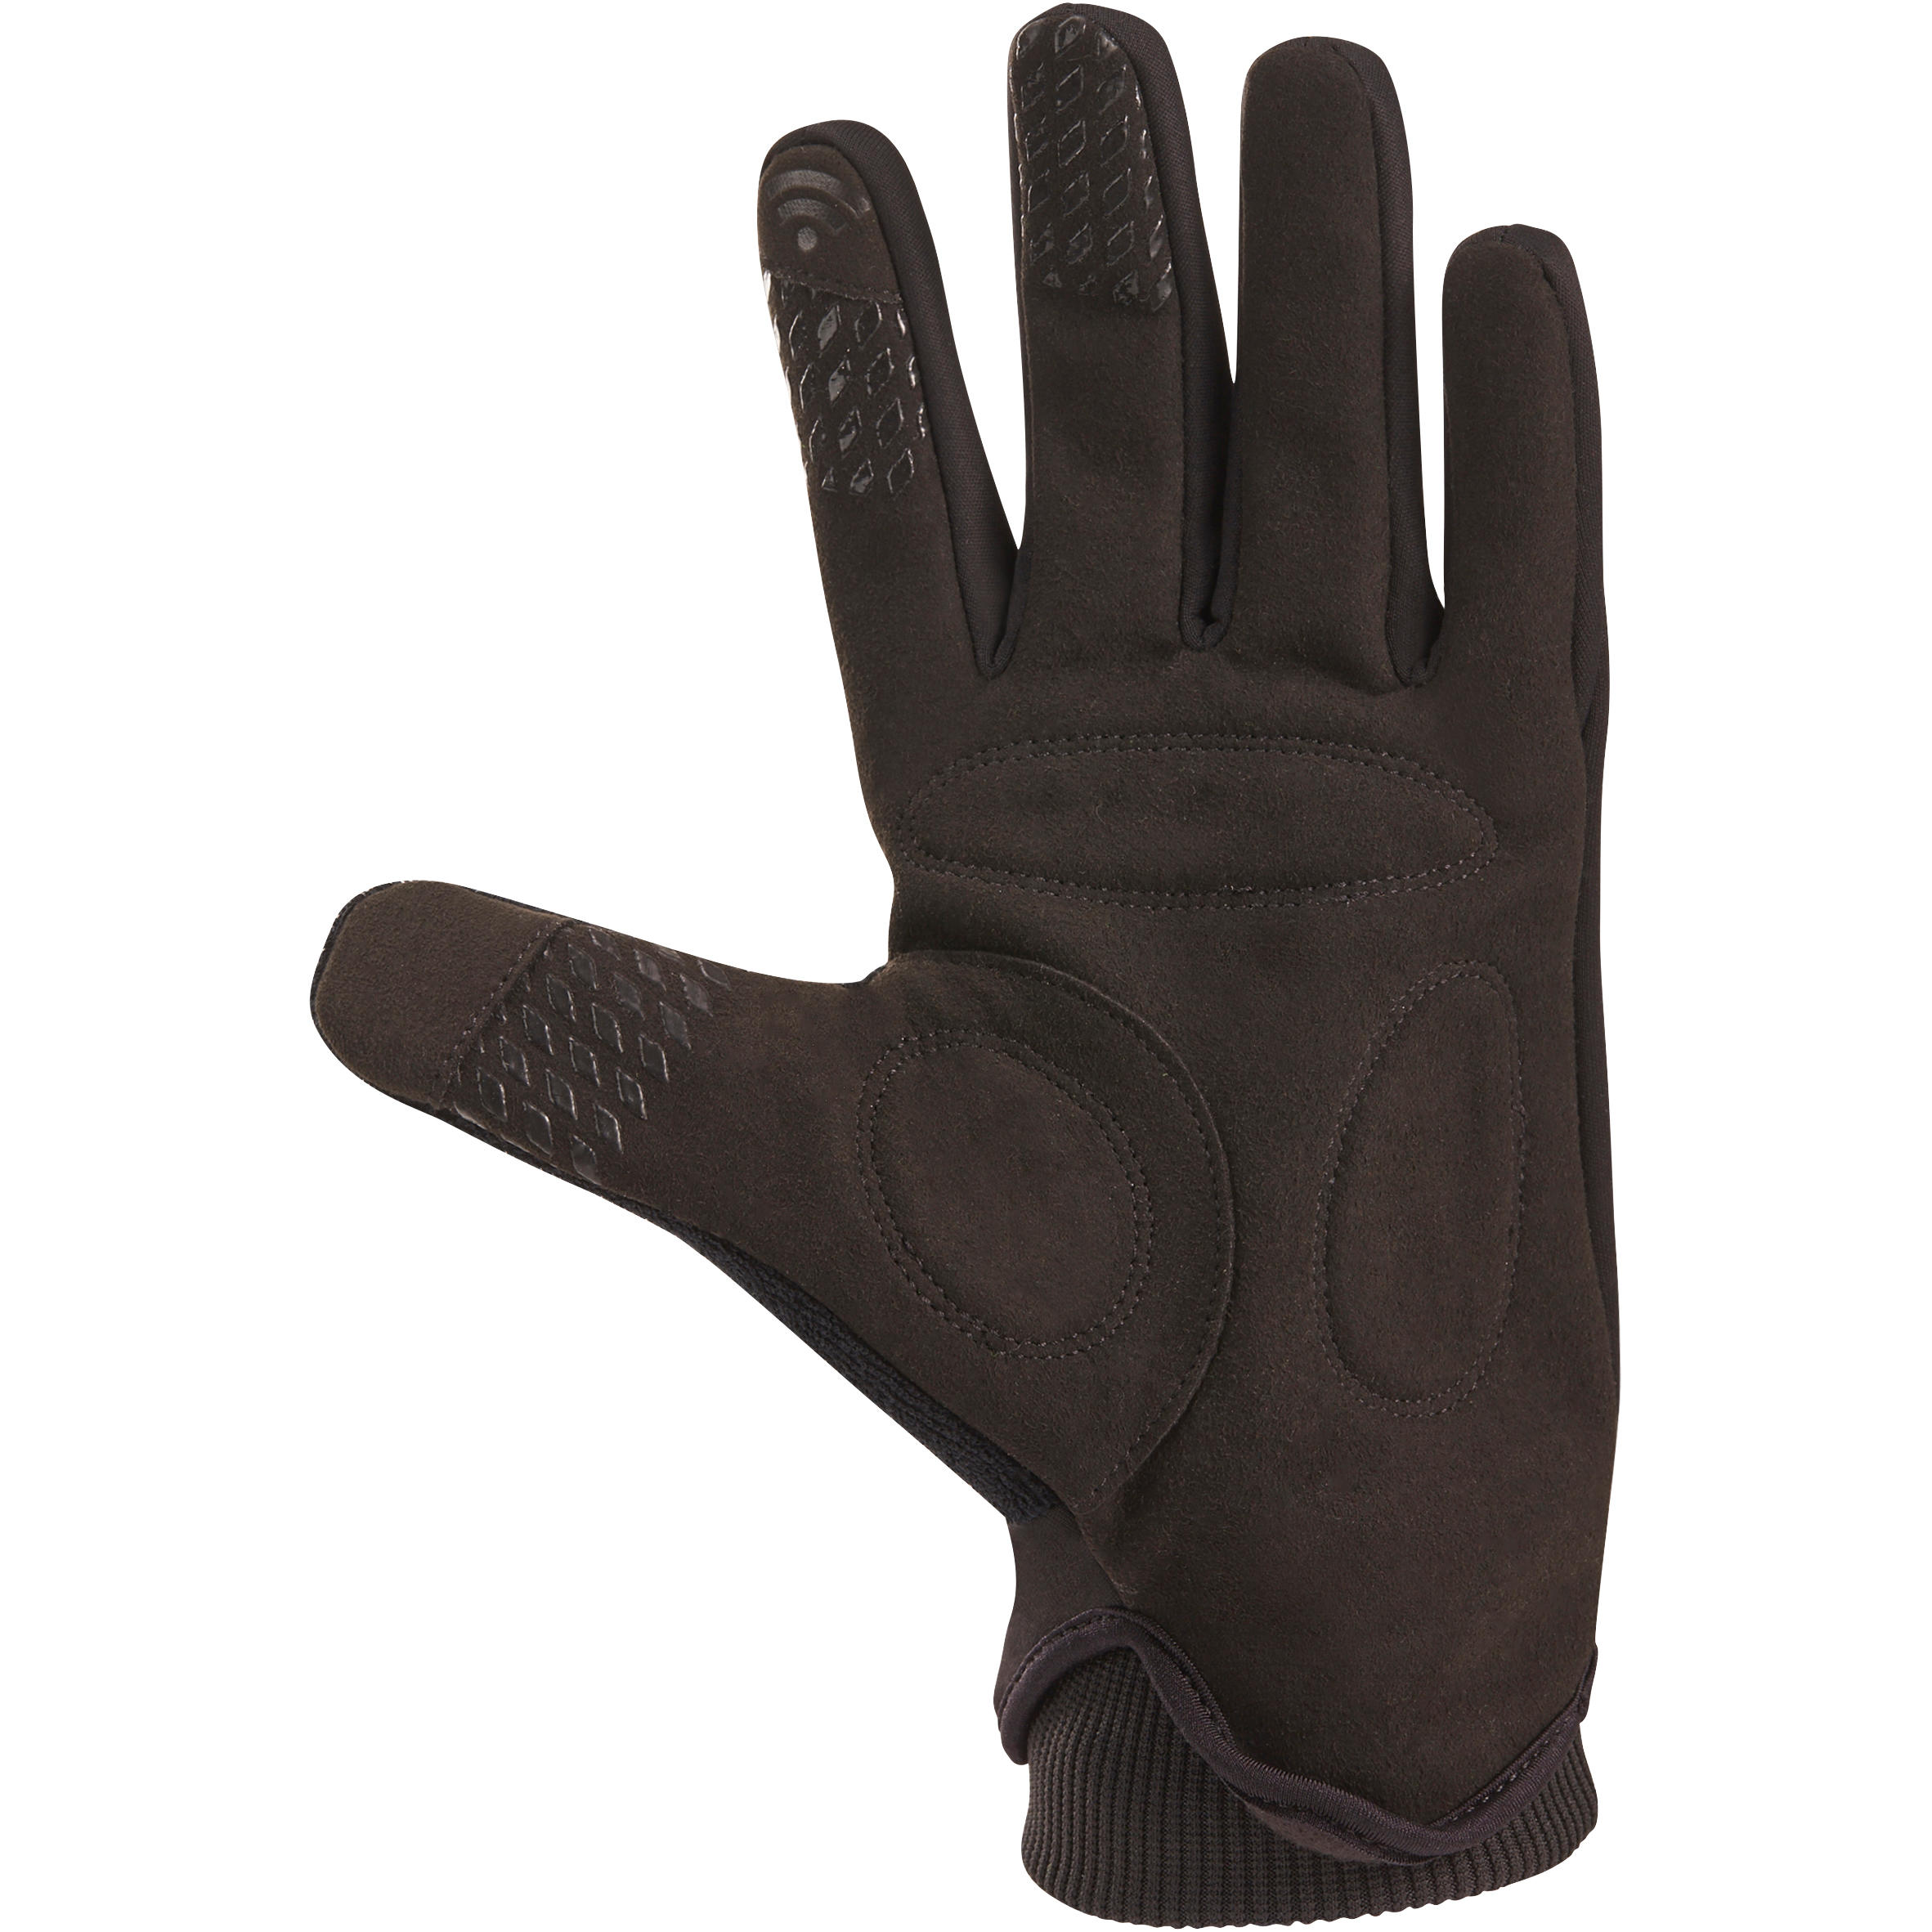 RC 500 Thermal Cycling Gloves - Black 2/12